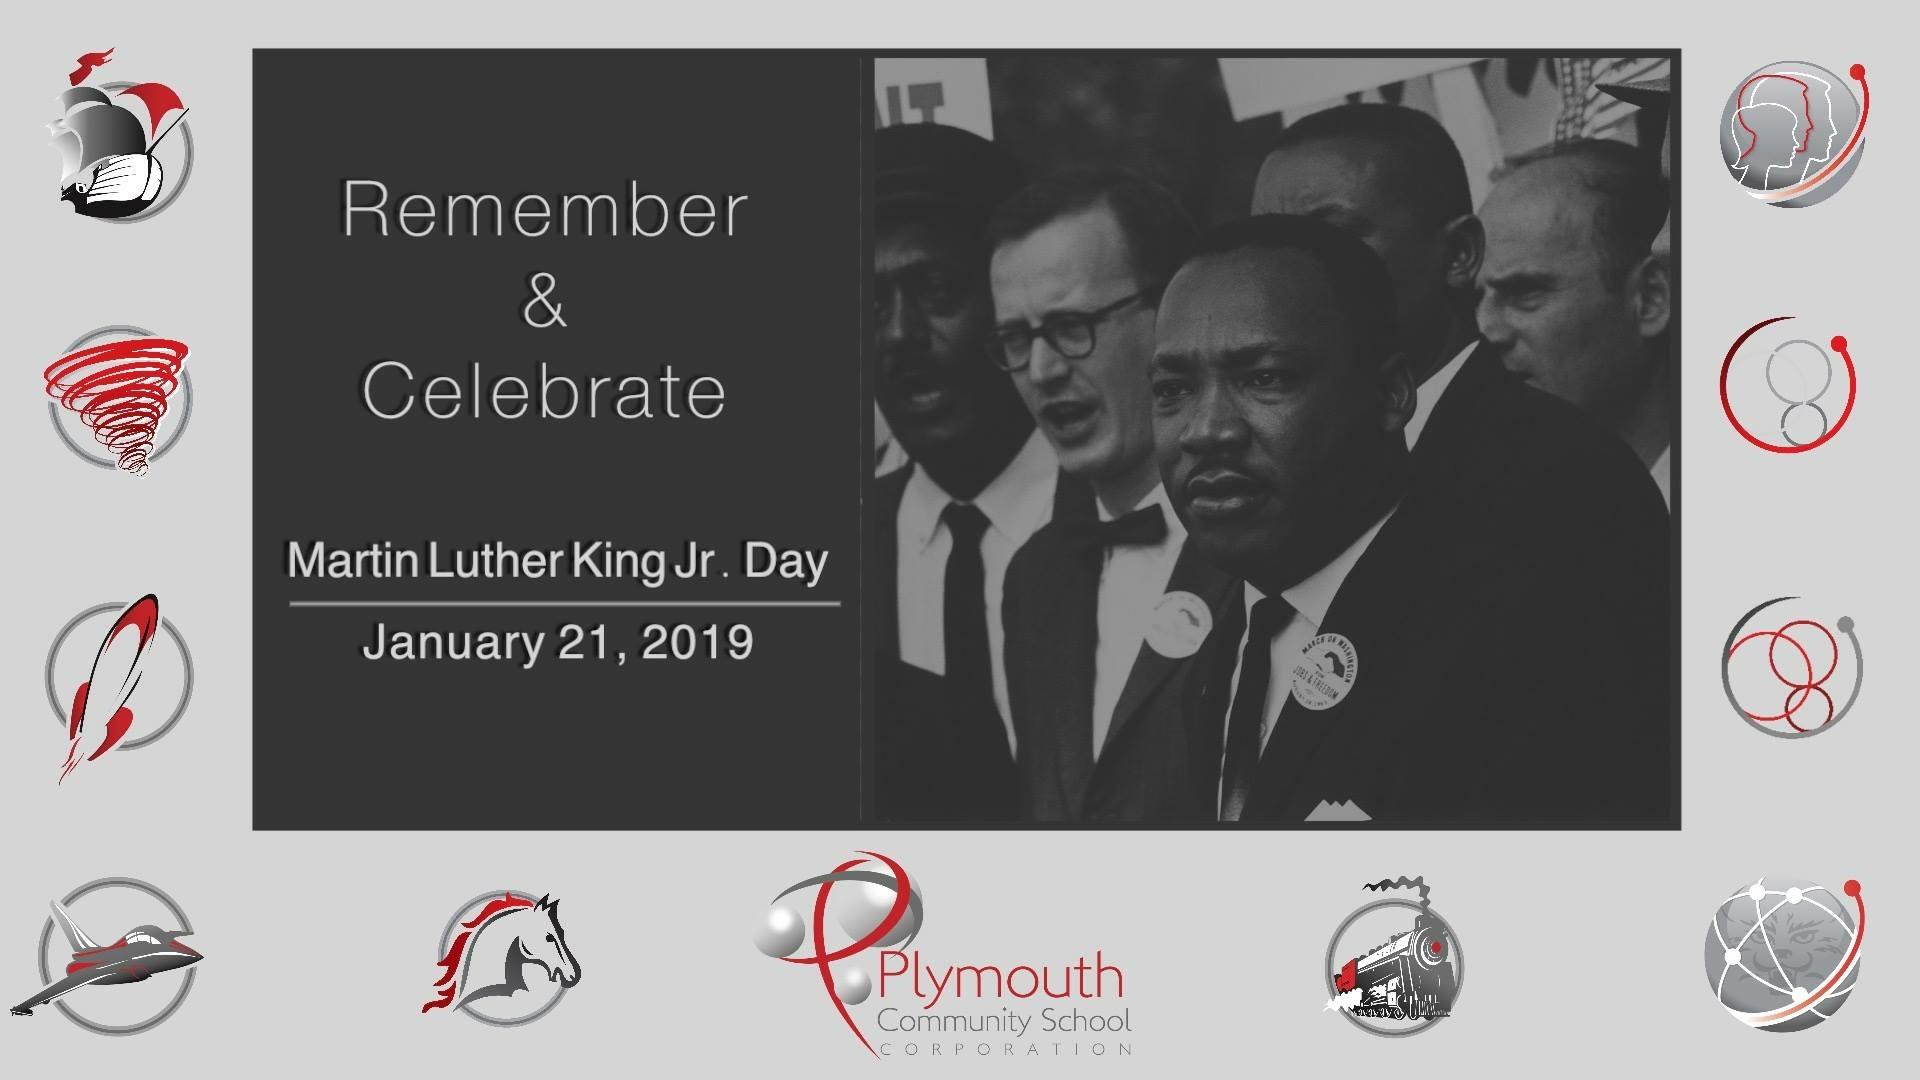 Remember and Celebrate Martin Luther King, Jr. Day January 21, 2019 image with picture and then the PCSC school logos